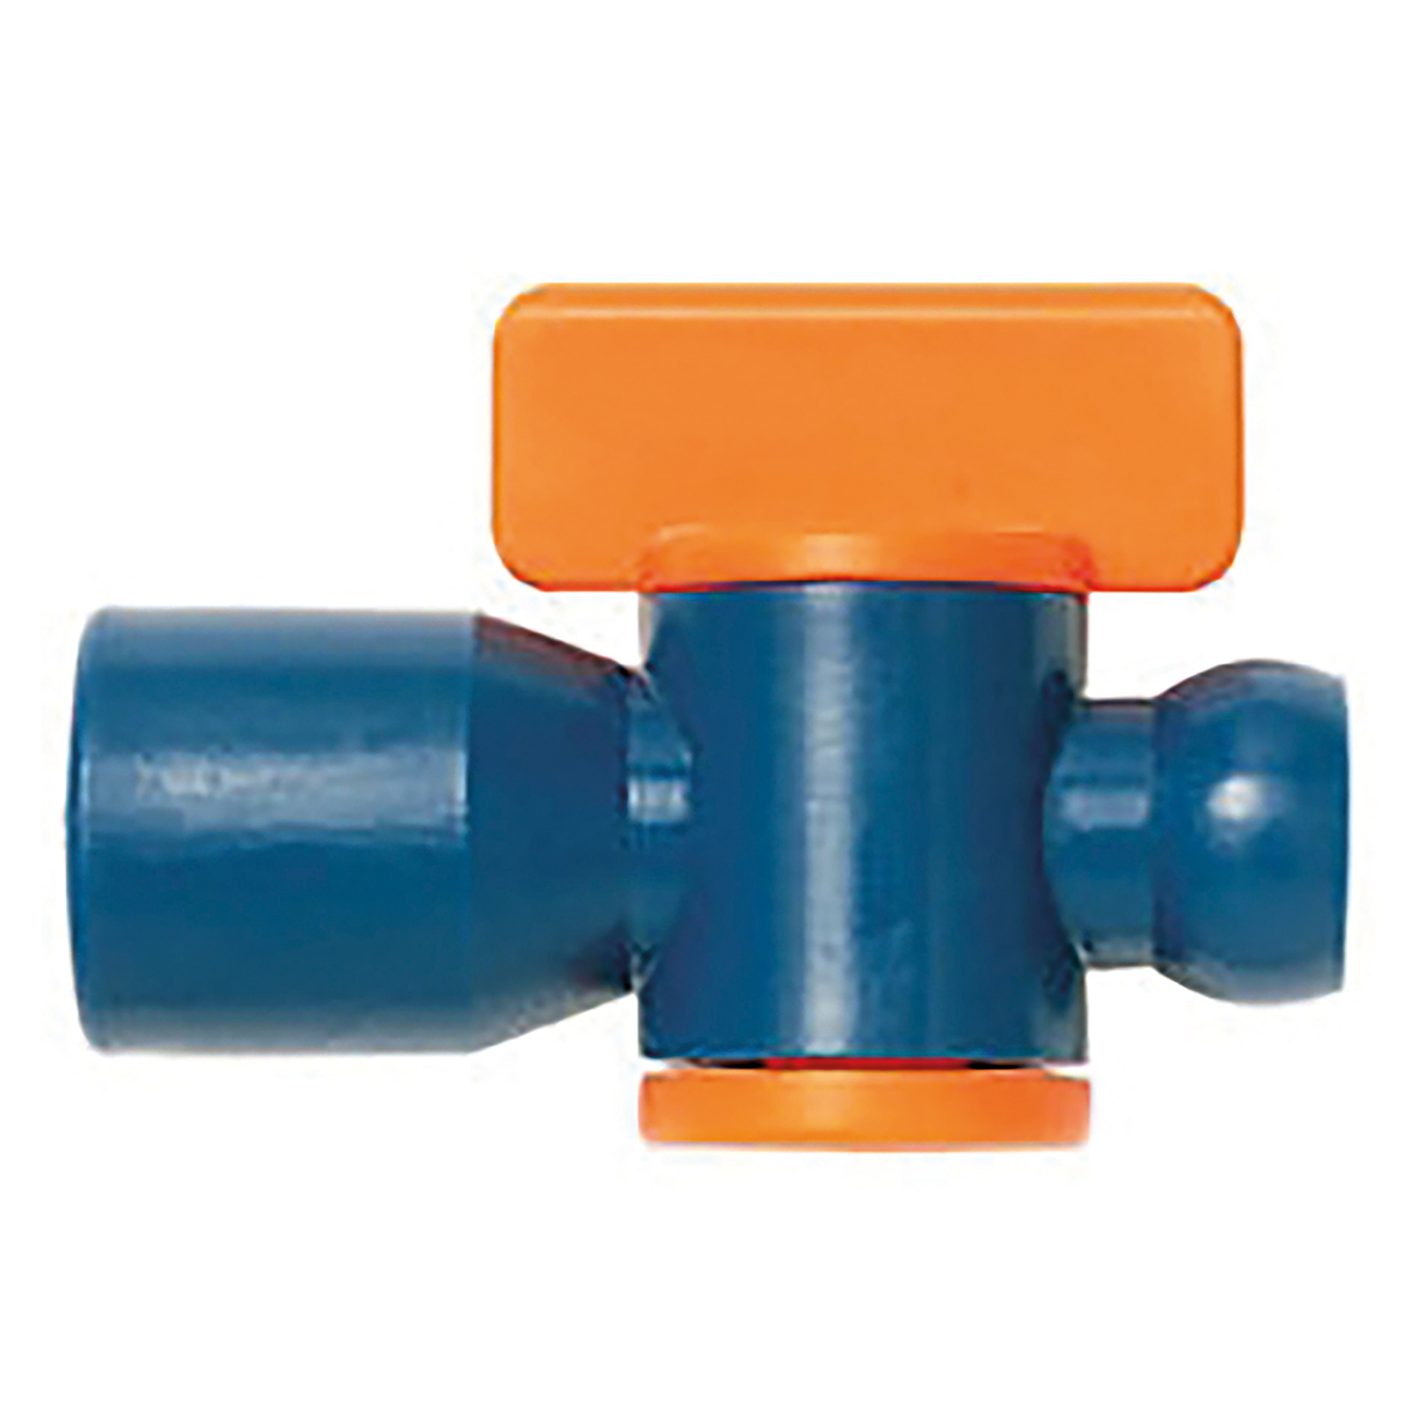 3/8" ELBOW NOZZLE FOR 1/2"COOL OOLING BALL